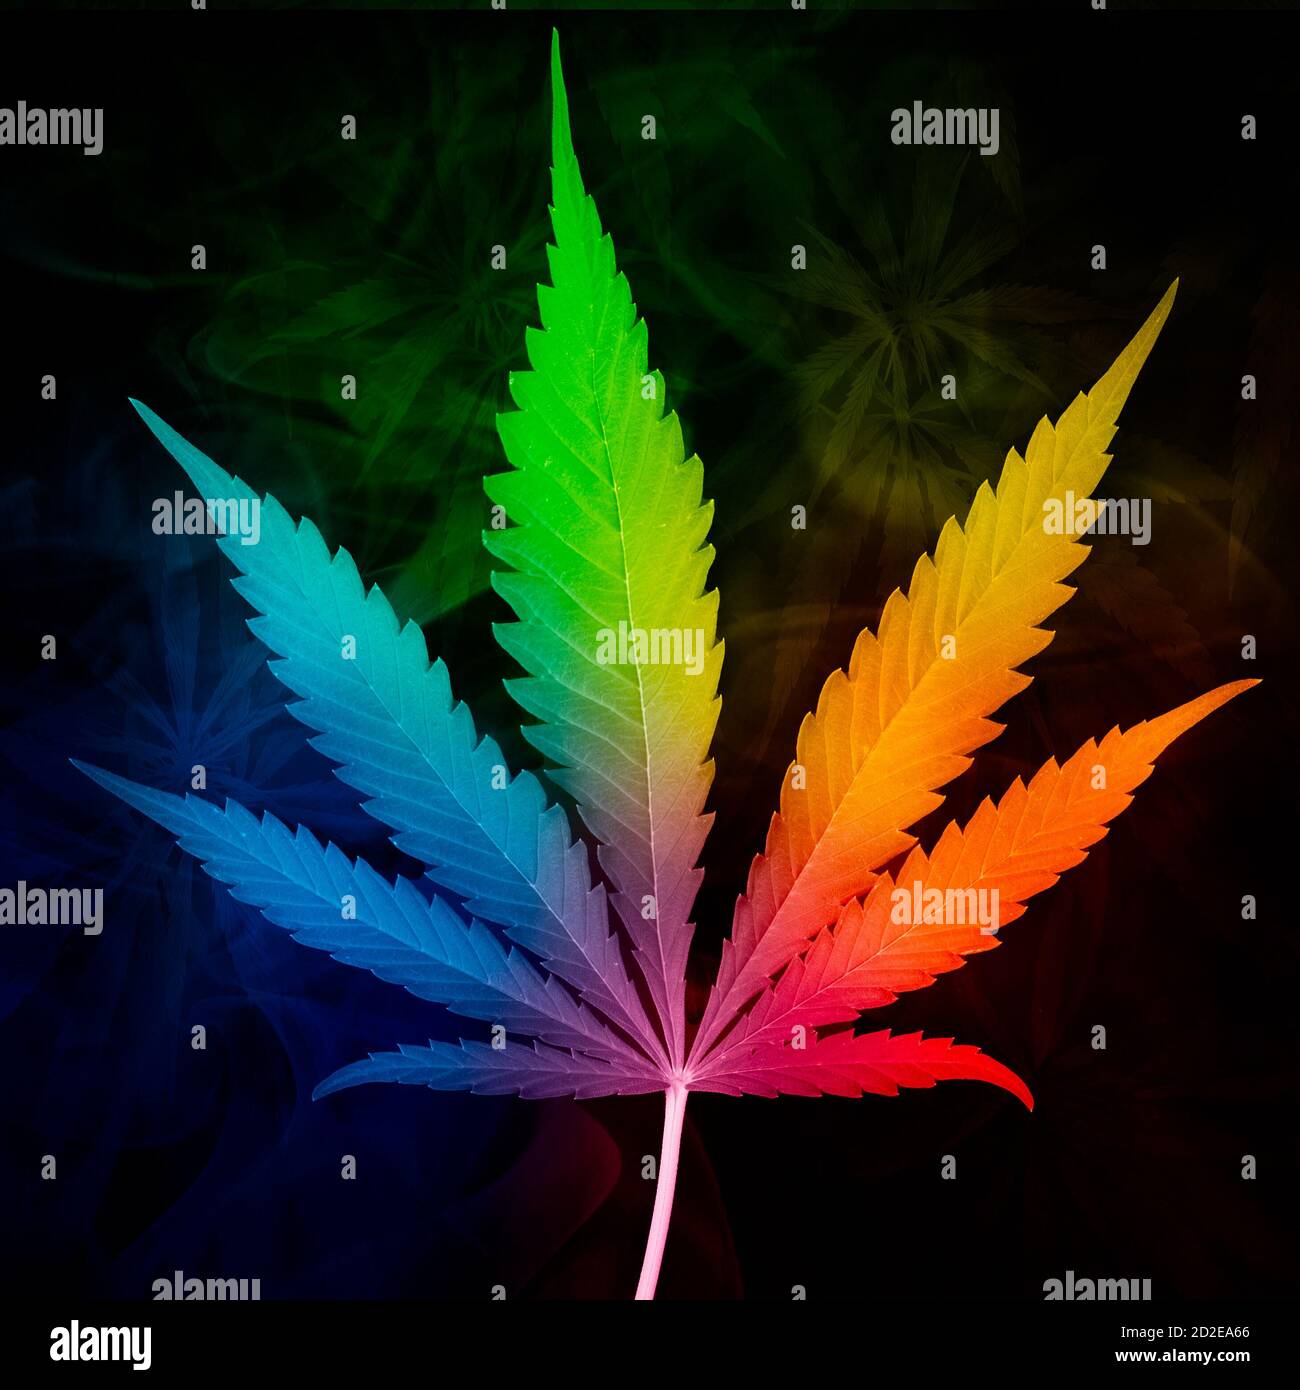 A multicolored cannabis leaf in blue, green, yellow, orange and red on a dark cannabis background texture Stock Photo